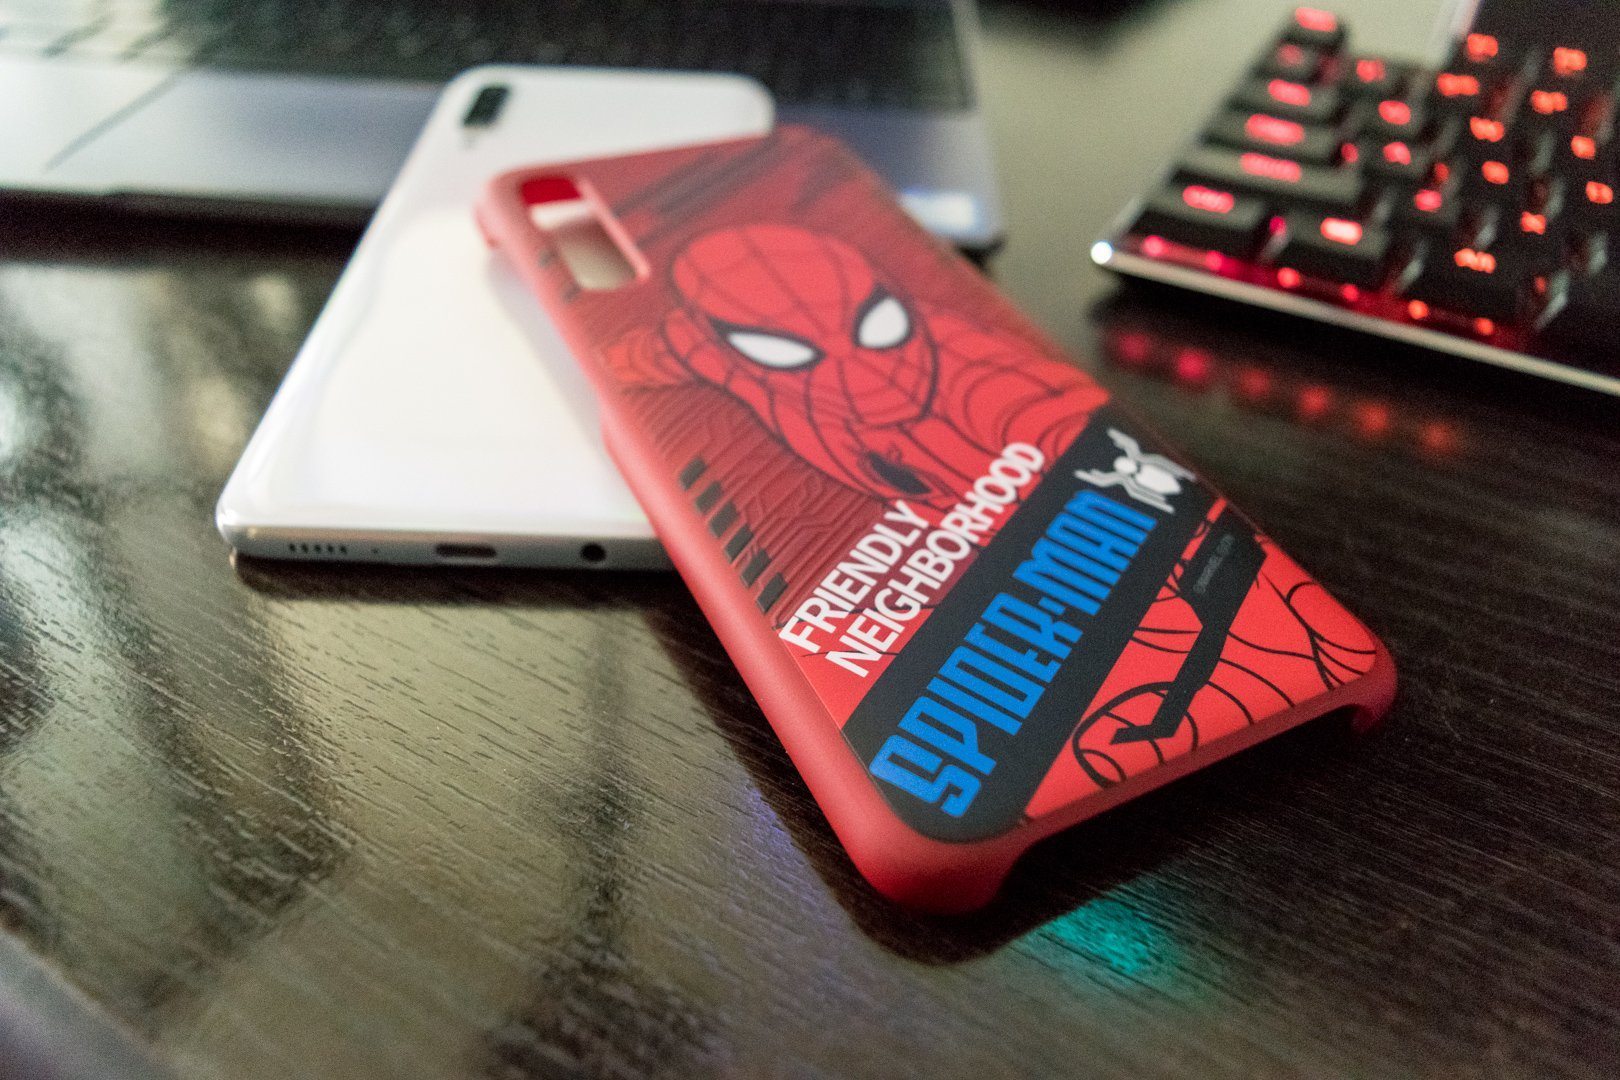 Samsung Galaxy A50 - Spiderman Far From Home - Review Pic 1